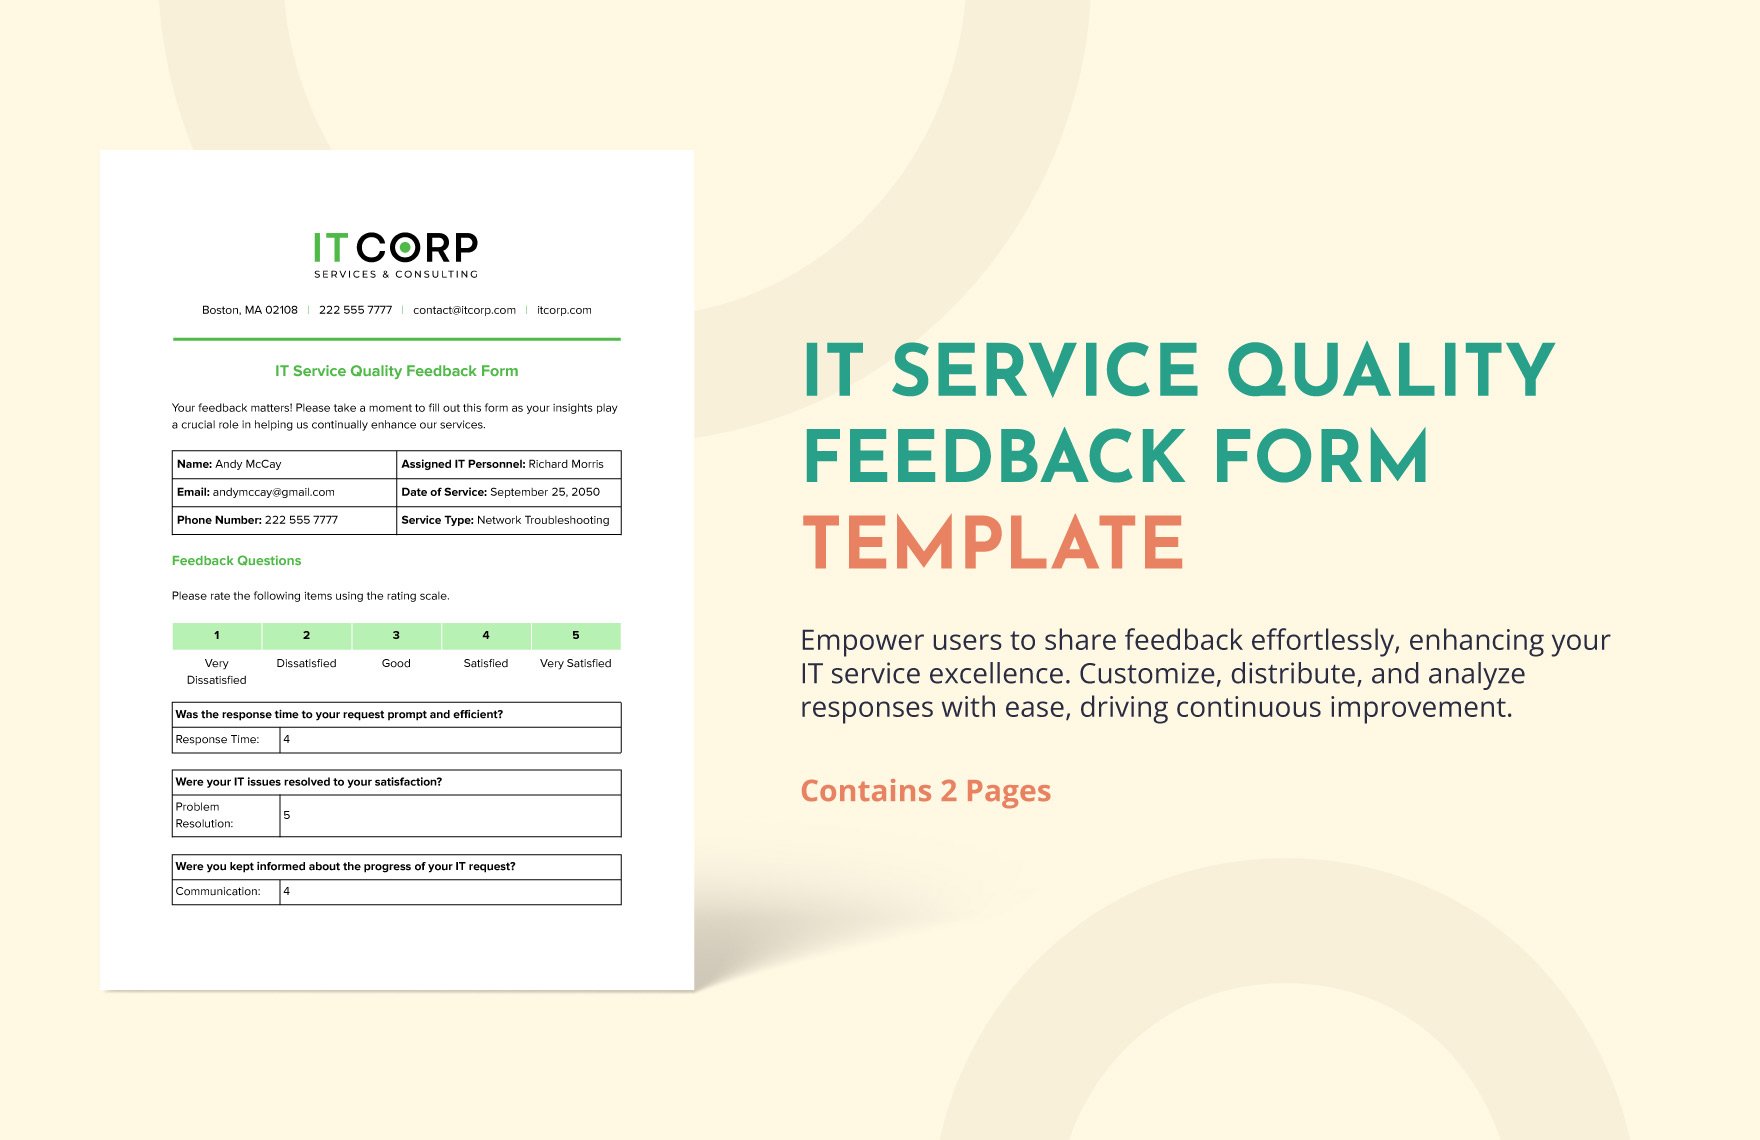 IT Service Quality Feedback Form Template